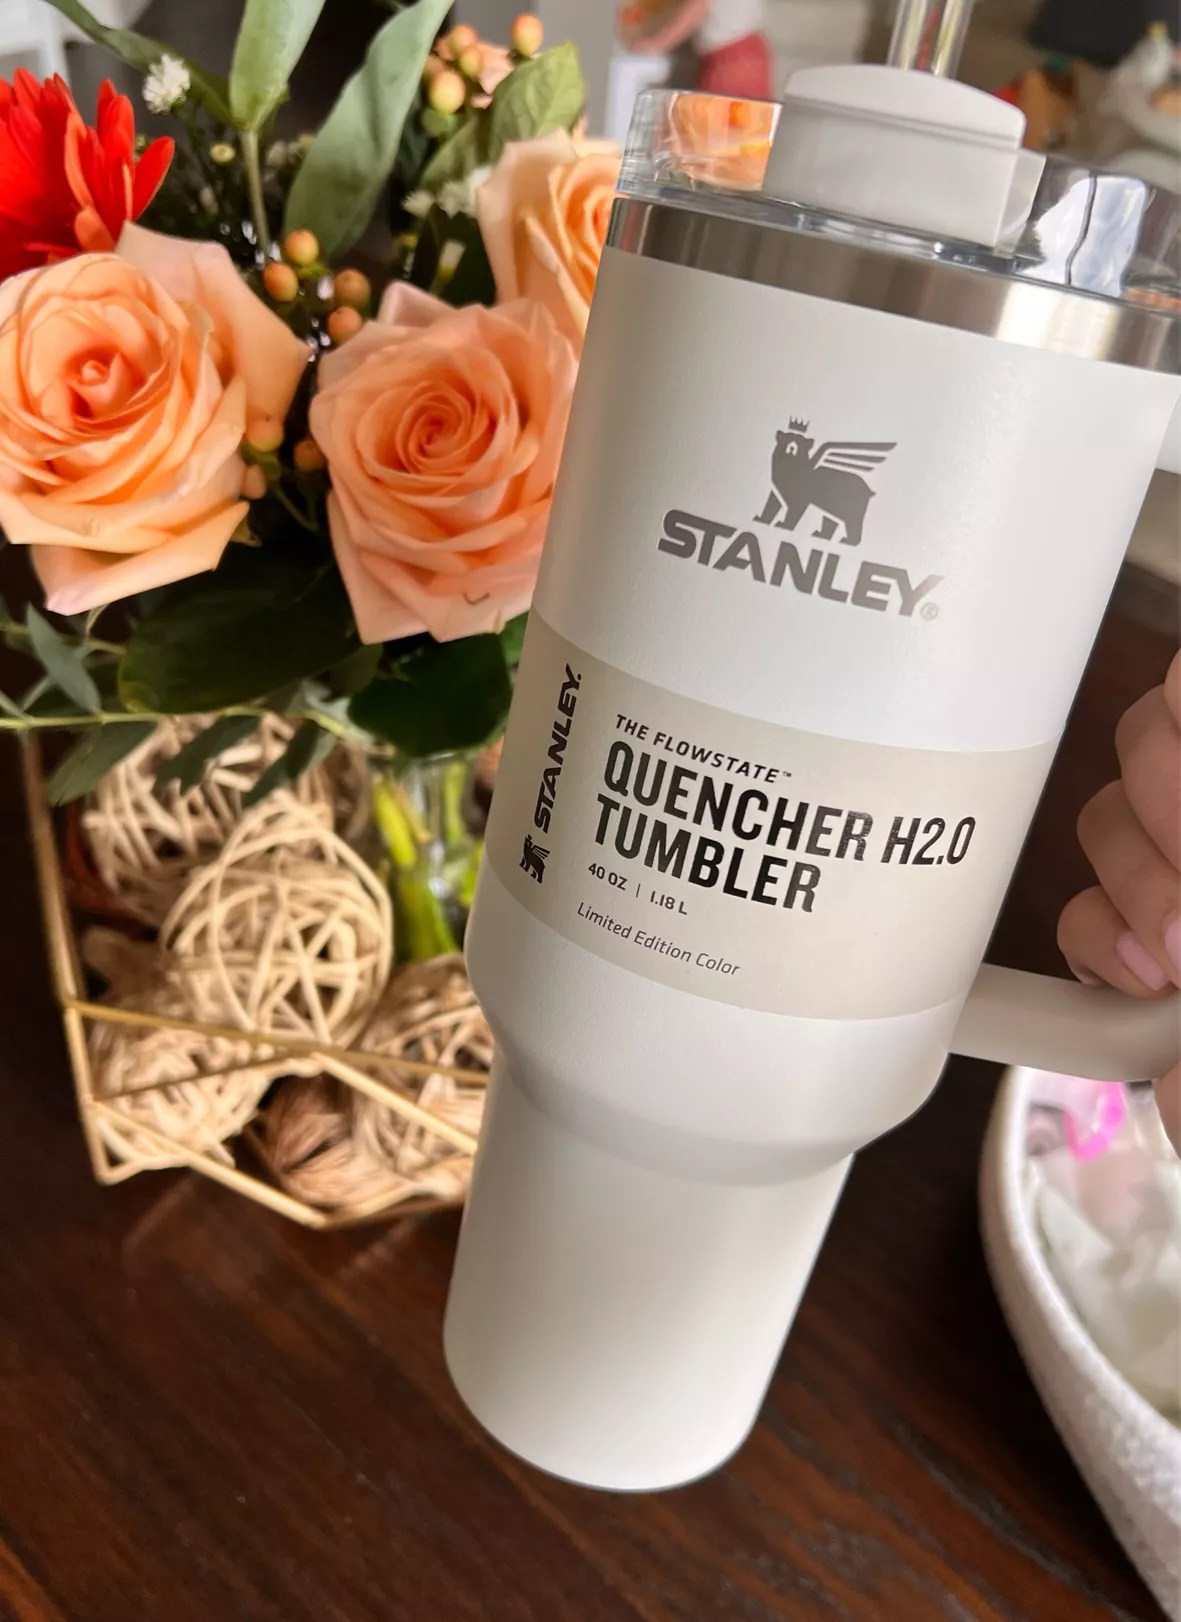 Stanley 40oz Stainless Steel H2.0 Flowstate Quencher Tumbler Rose